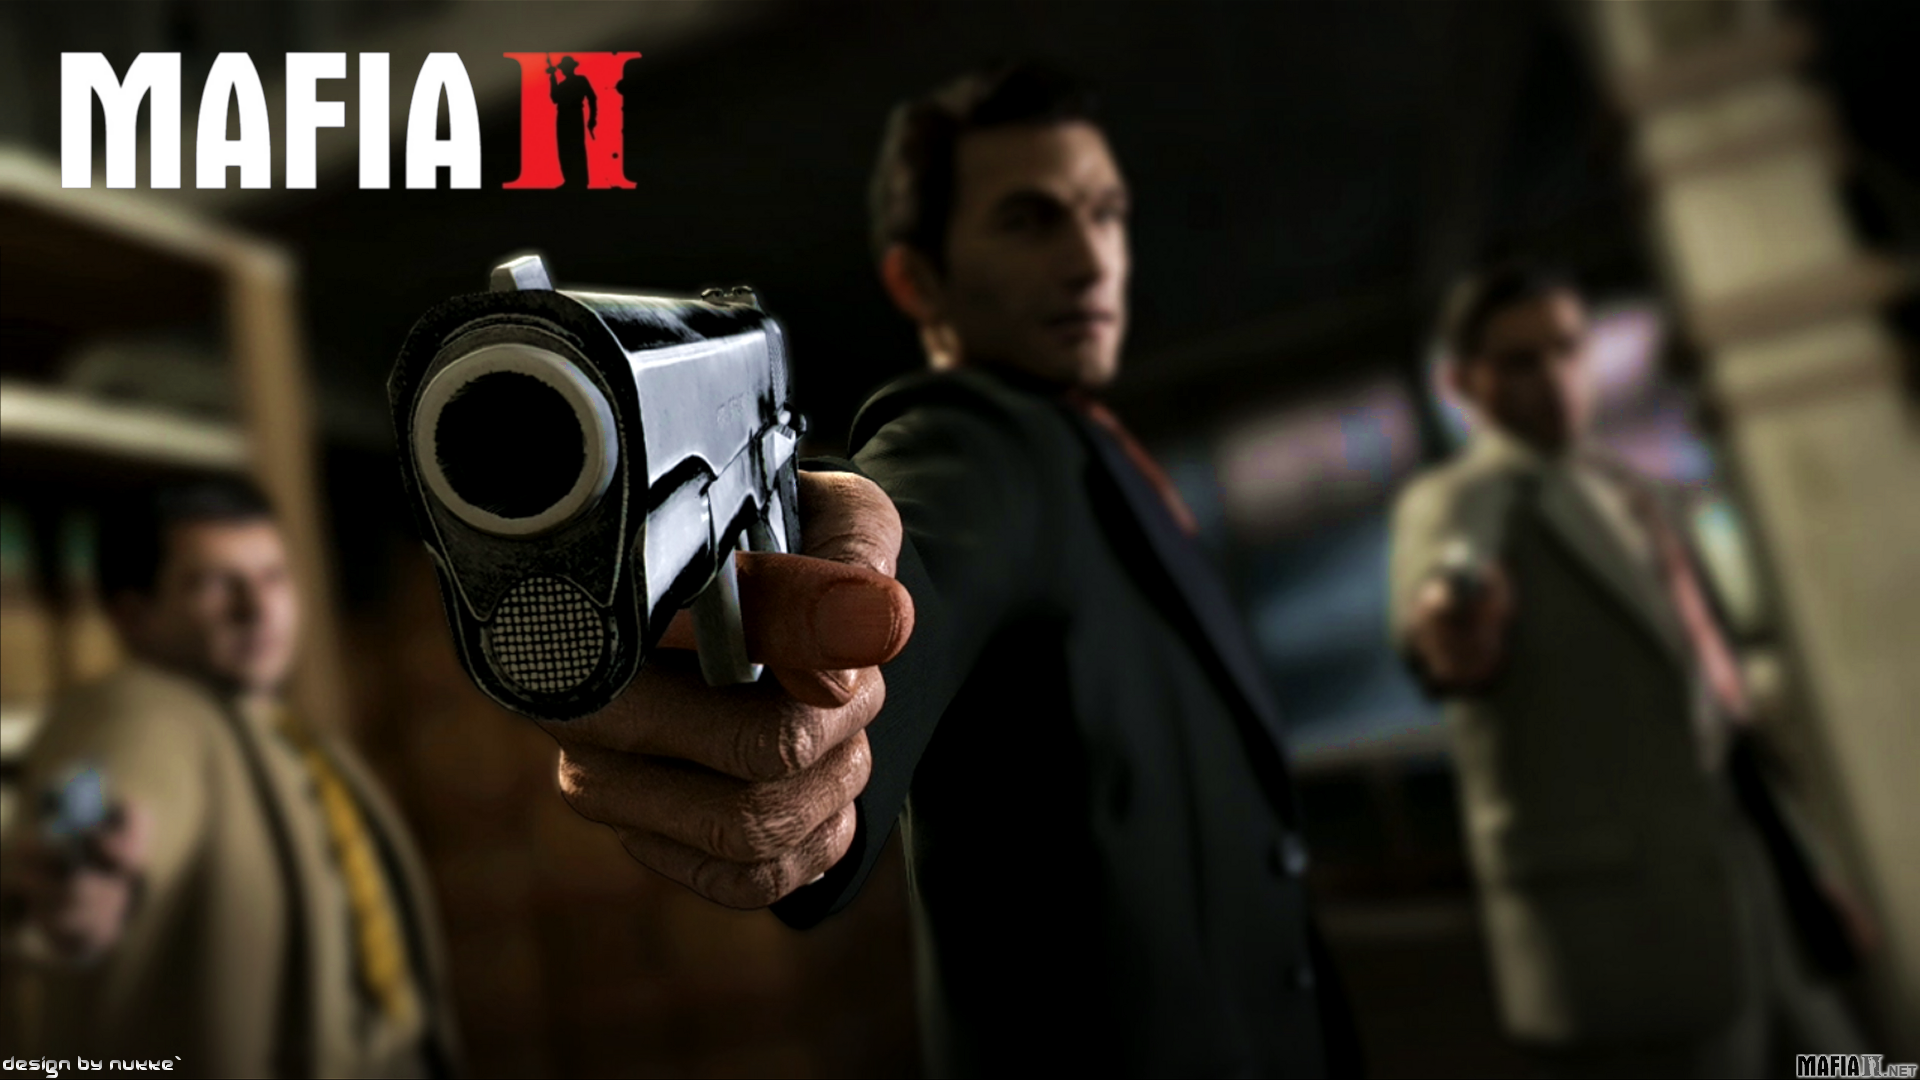 Mafia Ii Wallpaper HD Game High Quality Picture Pictures